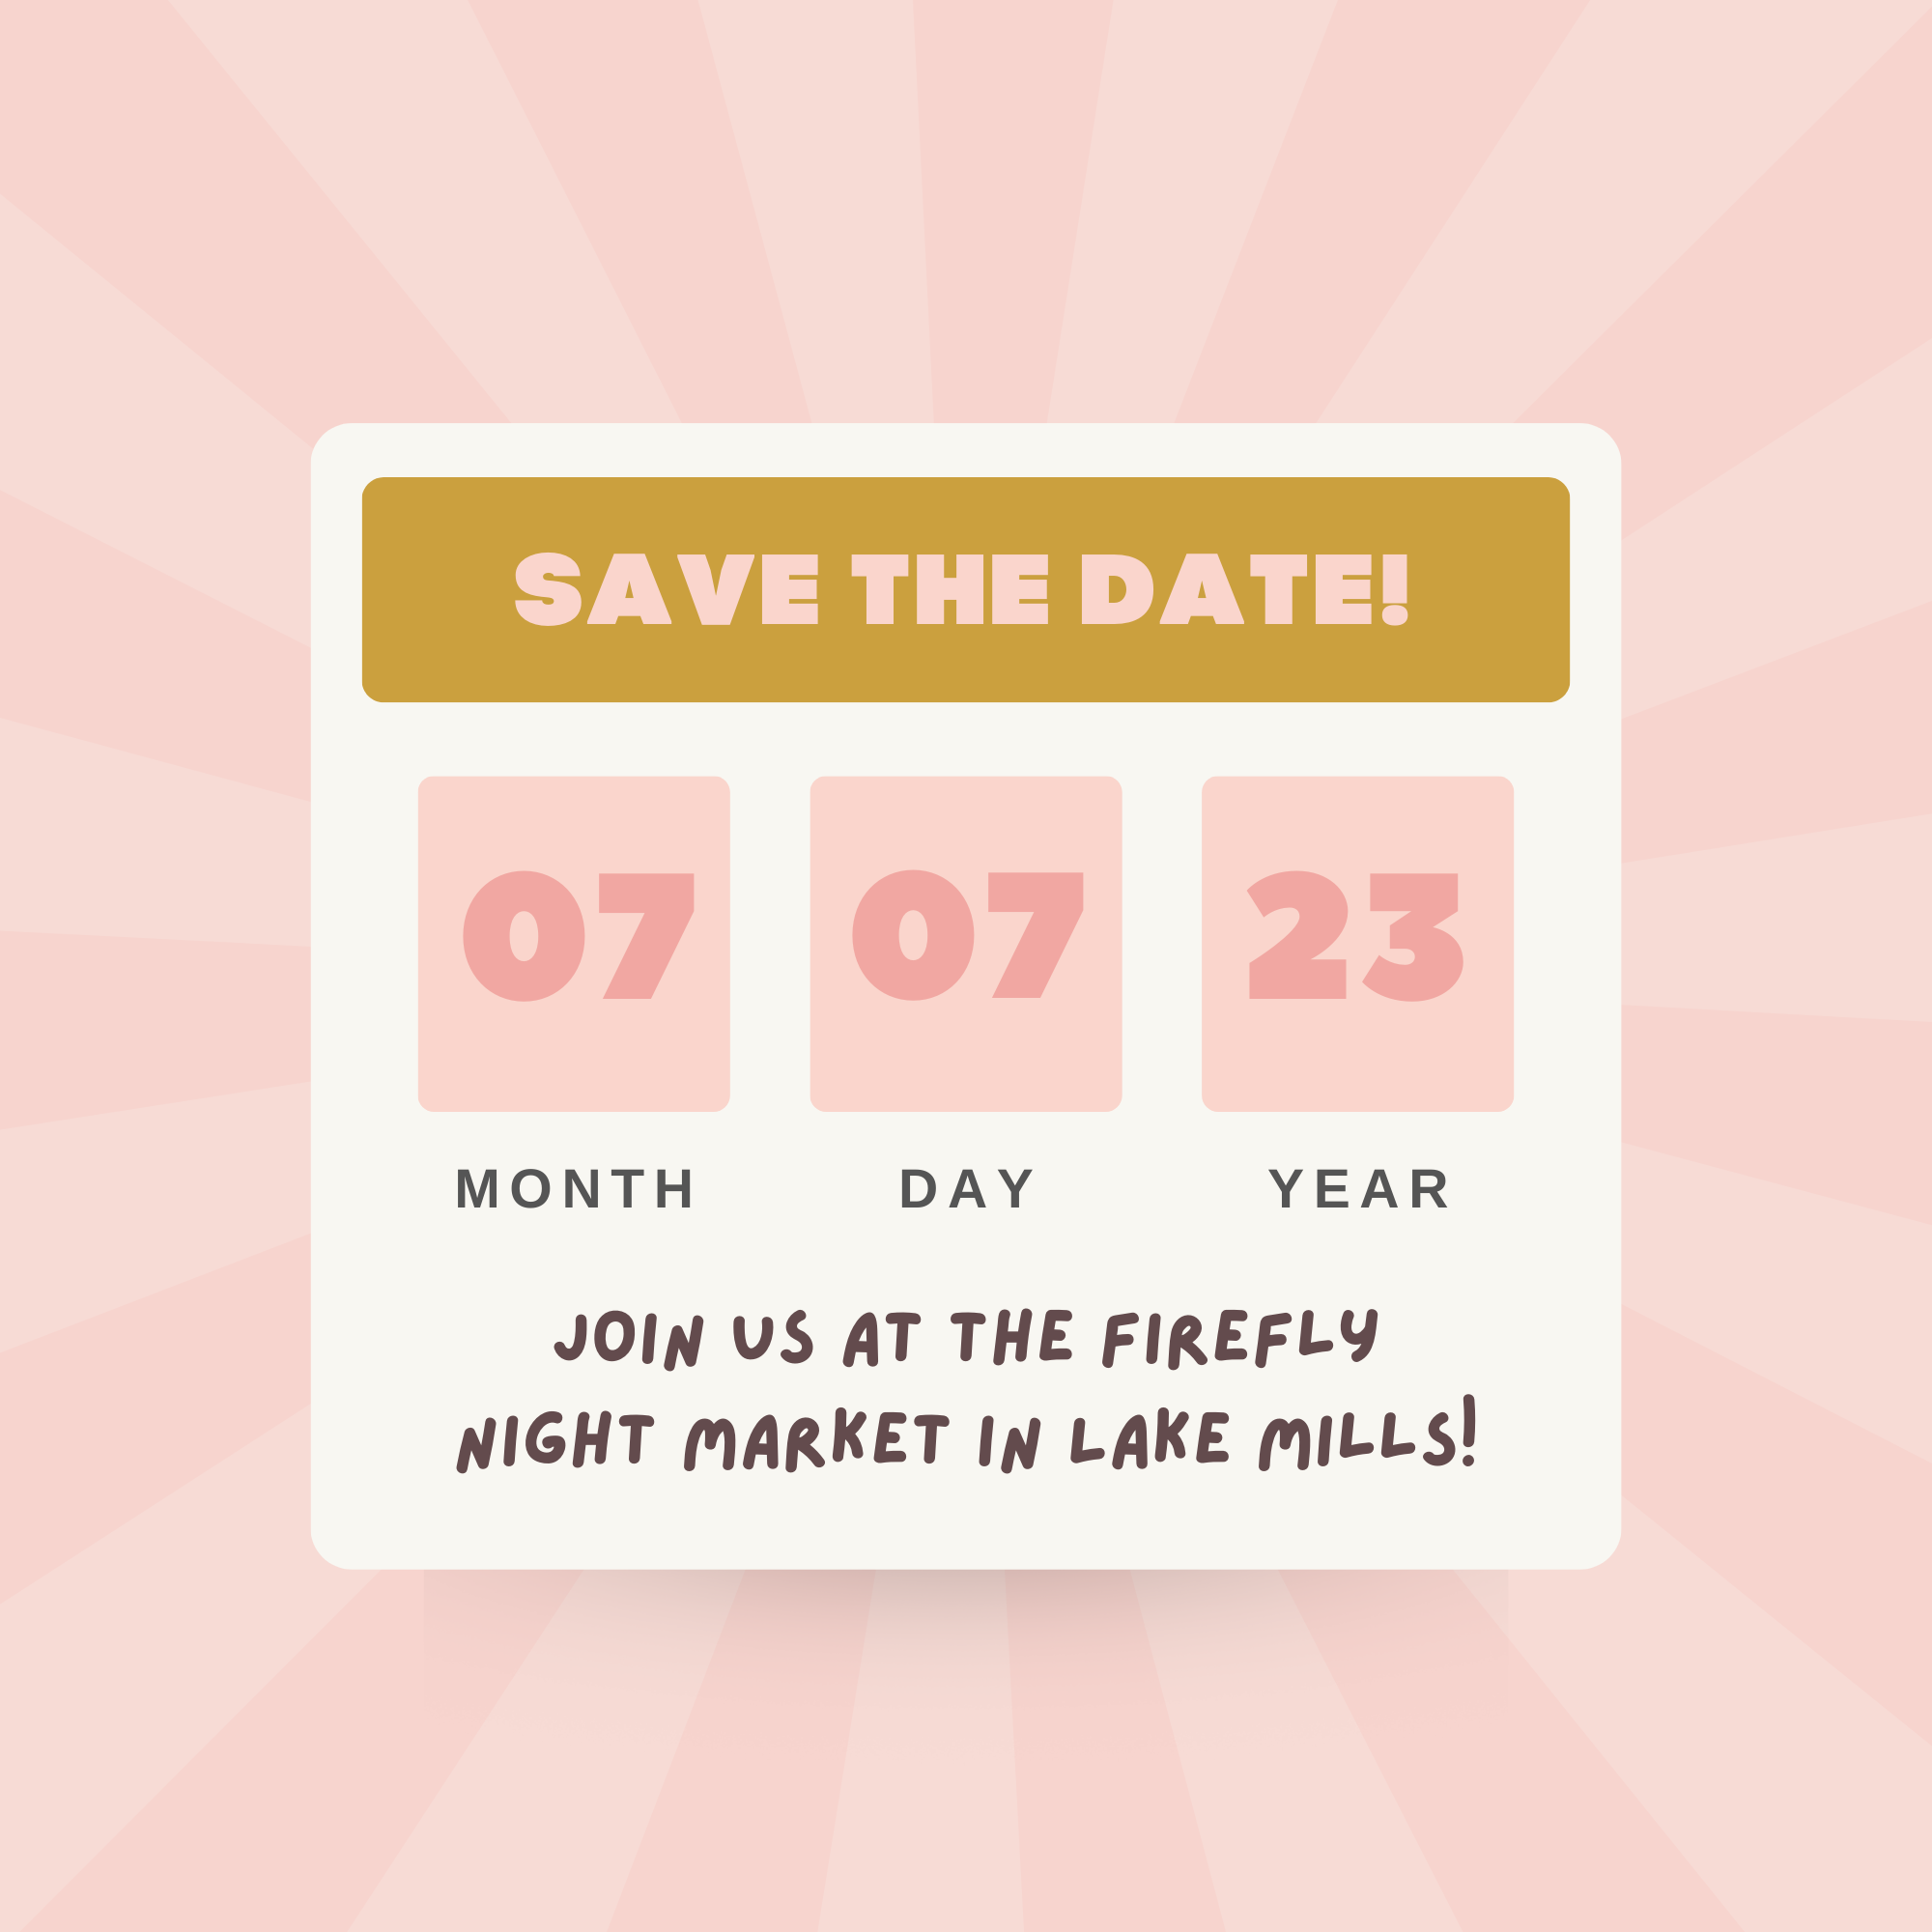 Exciting News! Join us at the Firefly Night Market in Lake Mills on July 7th!